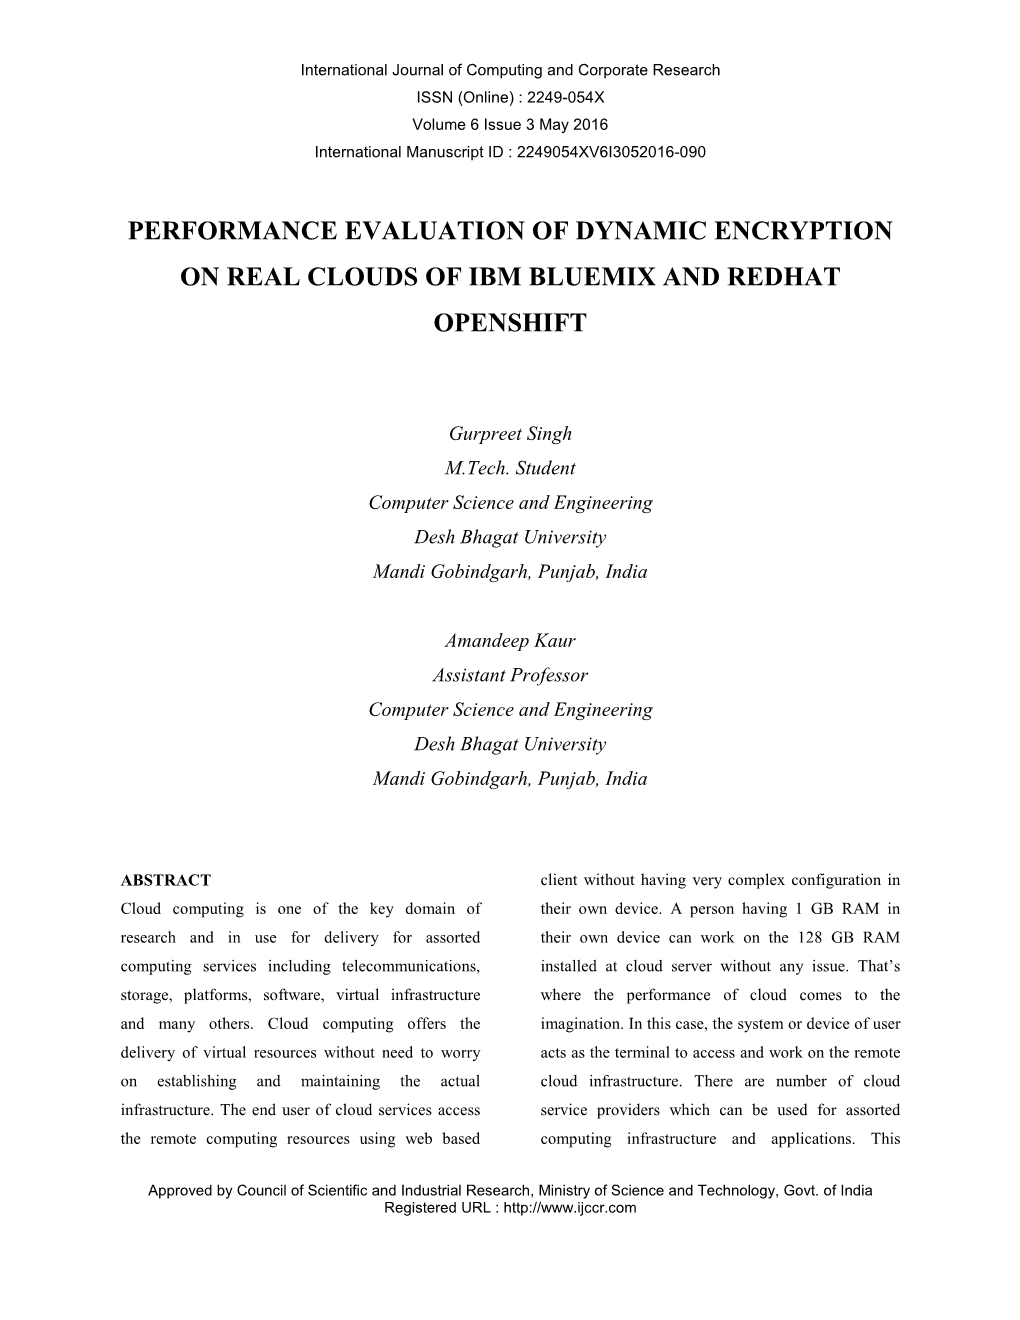 Performance Evaluation of Dynamic Encryption on Real Clouds of Ibm Bluemix and Redhat Openshift